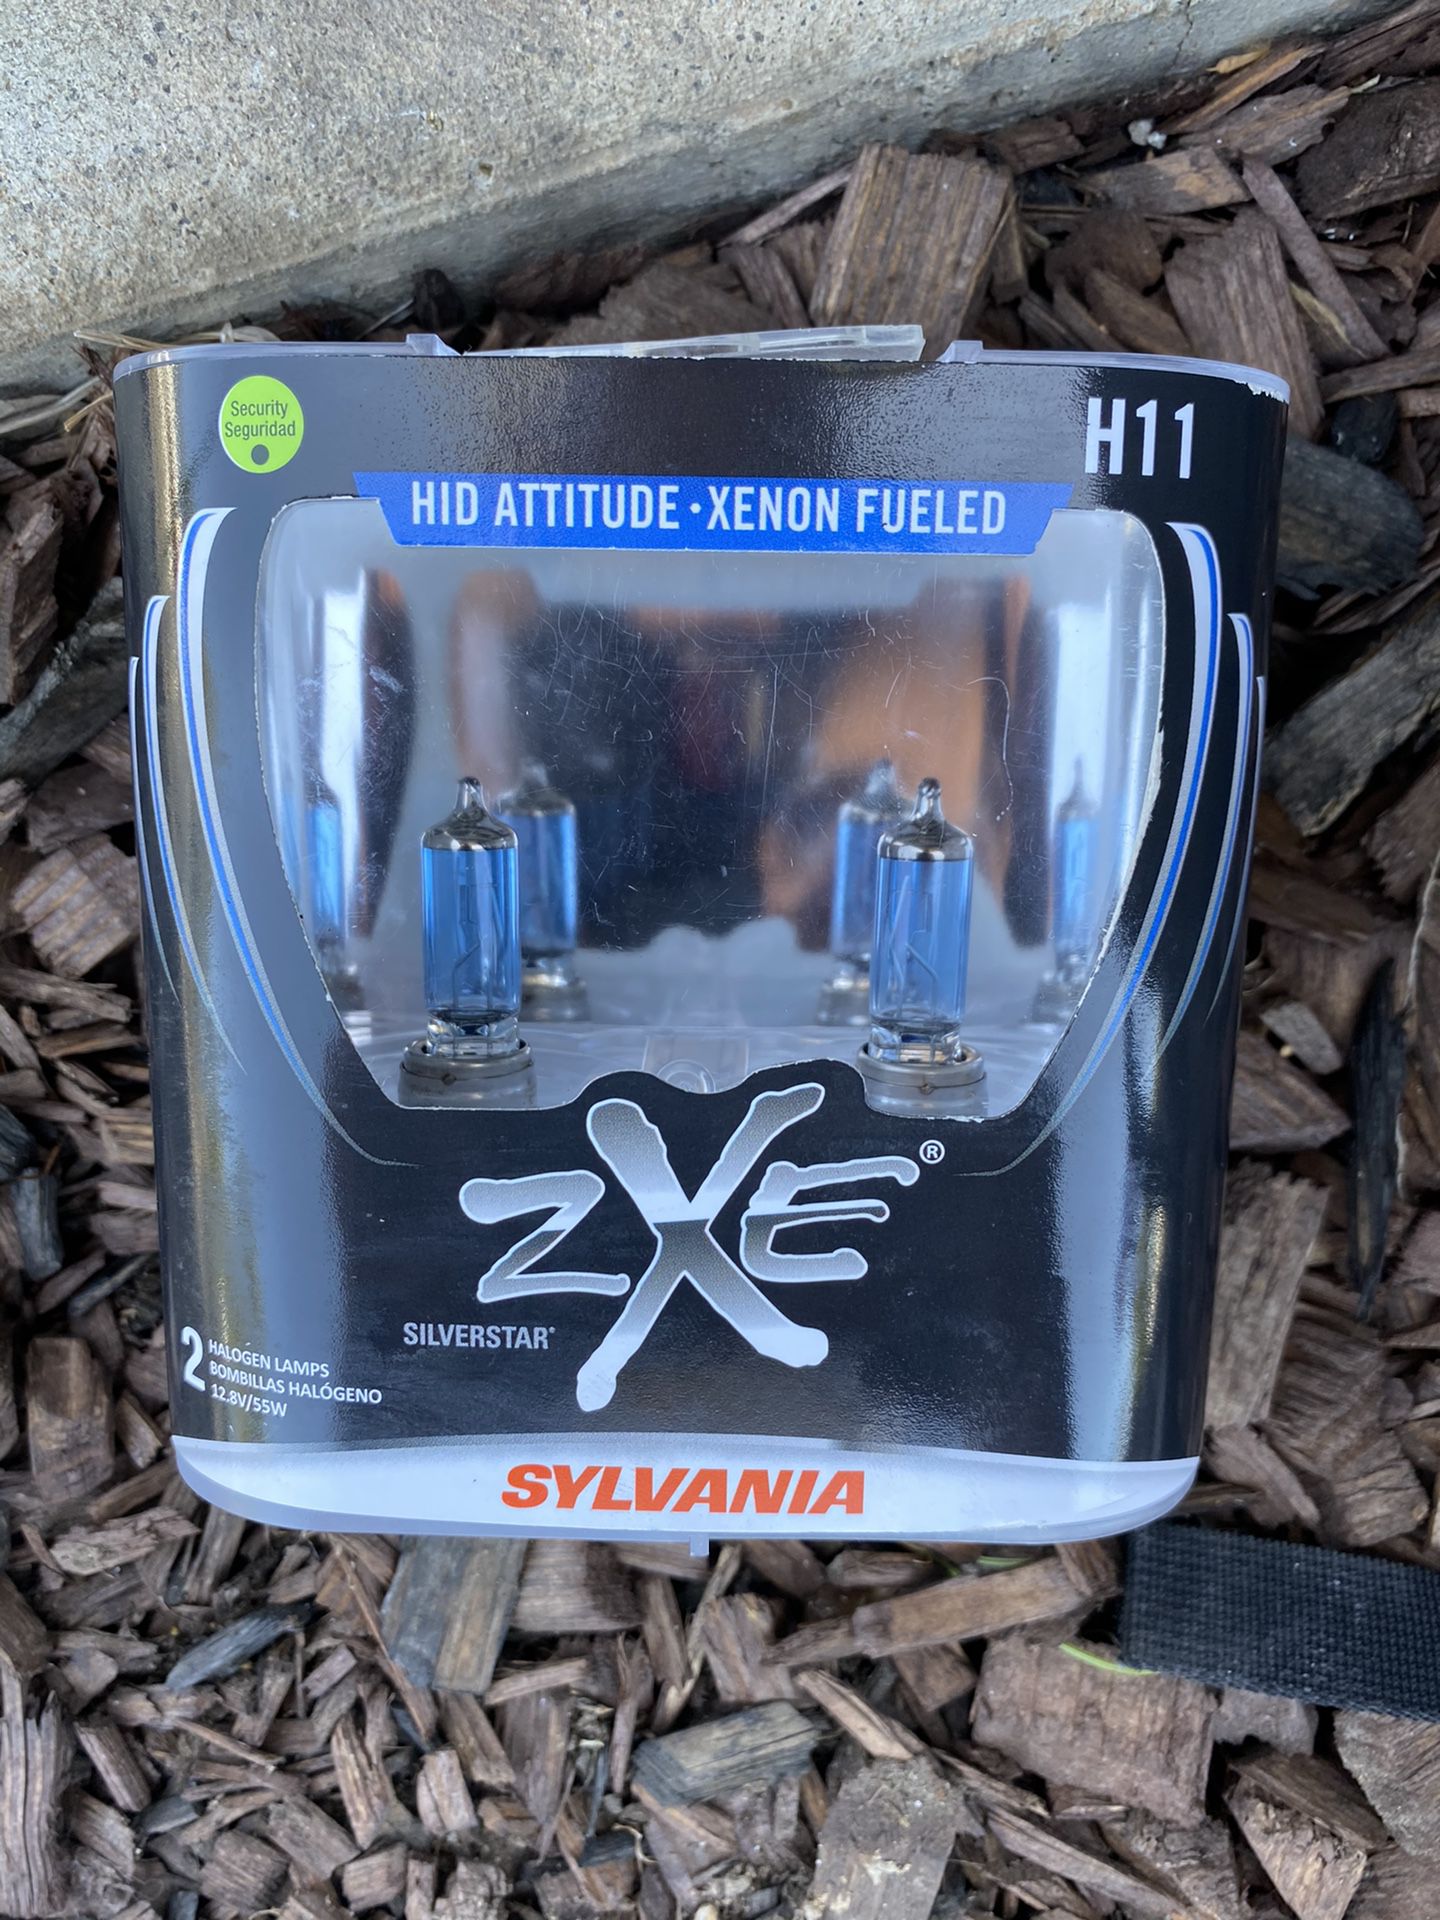 Sylvania H11 xenon blue headlights. Package in pic says h11 cuz I have both sets